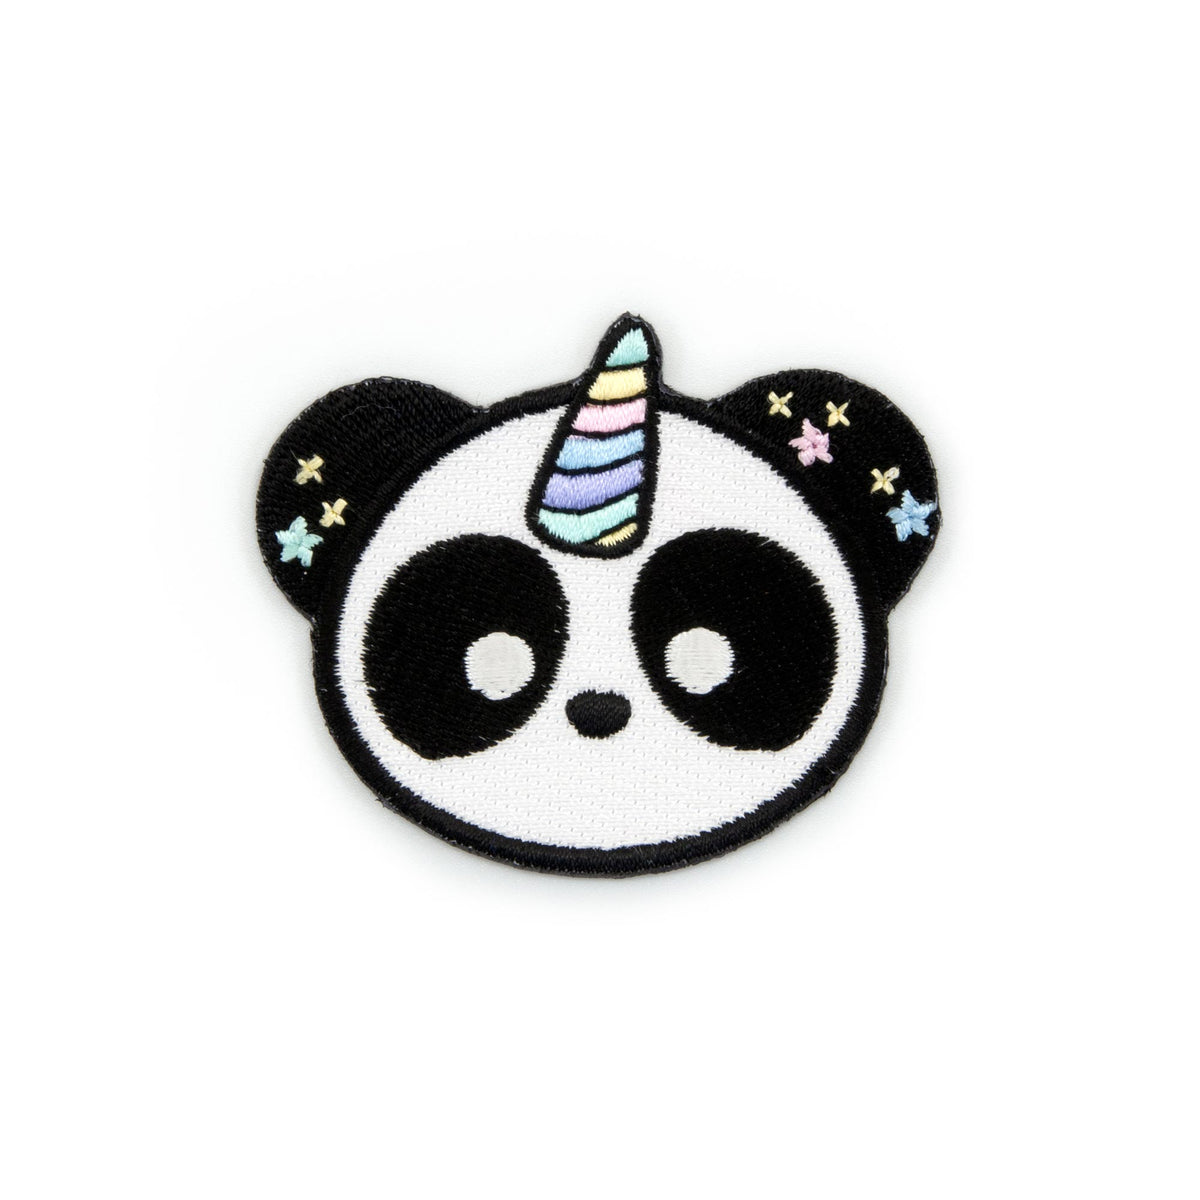 Pandacorn embroidered iron-on patch